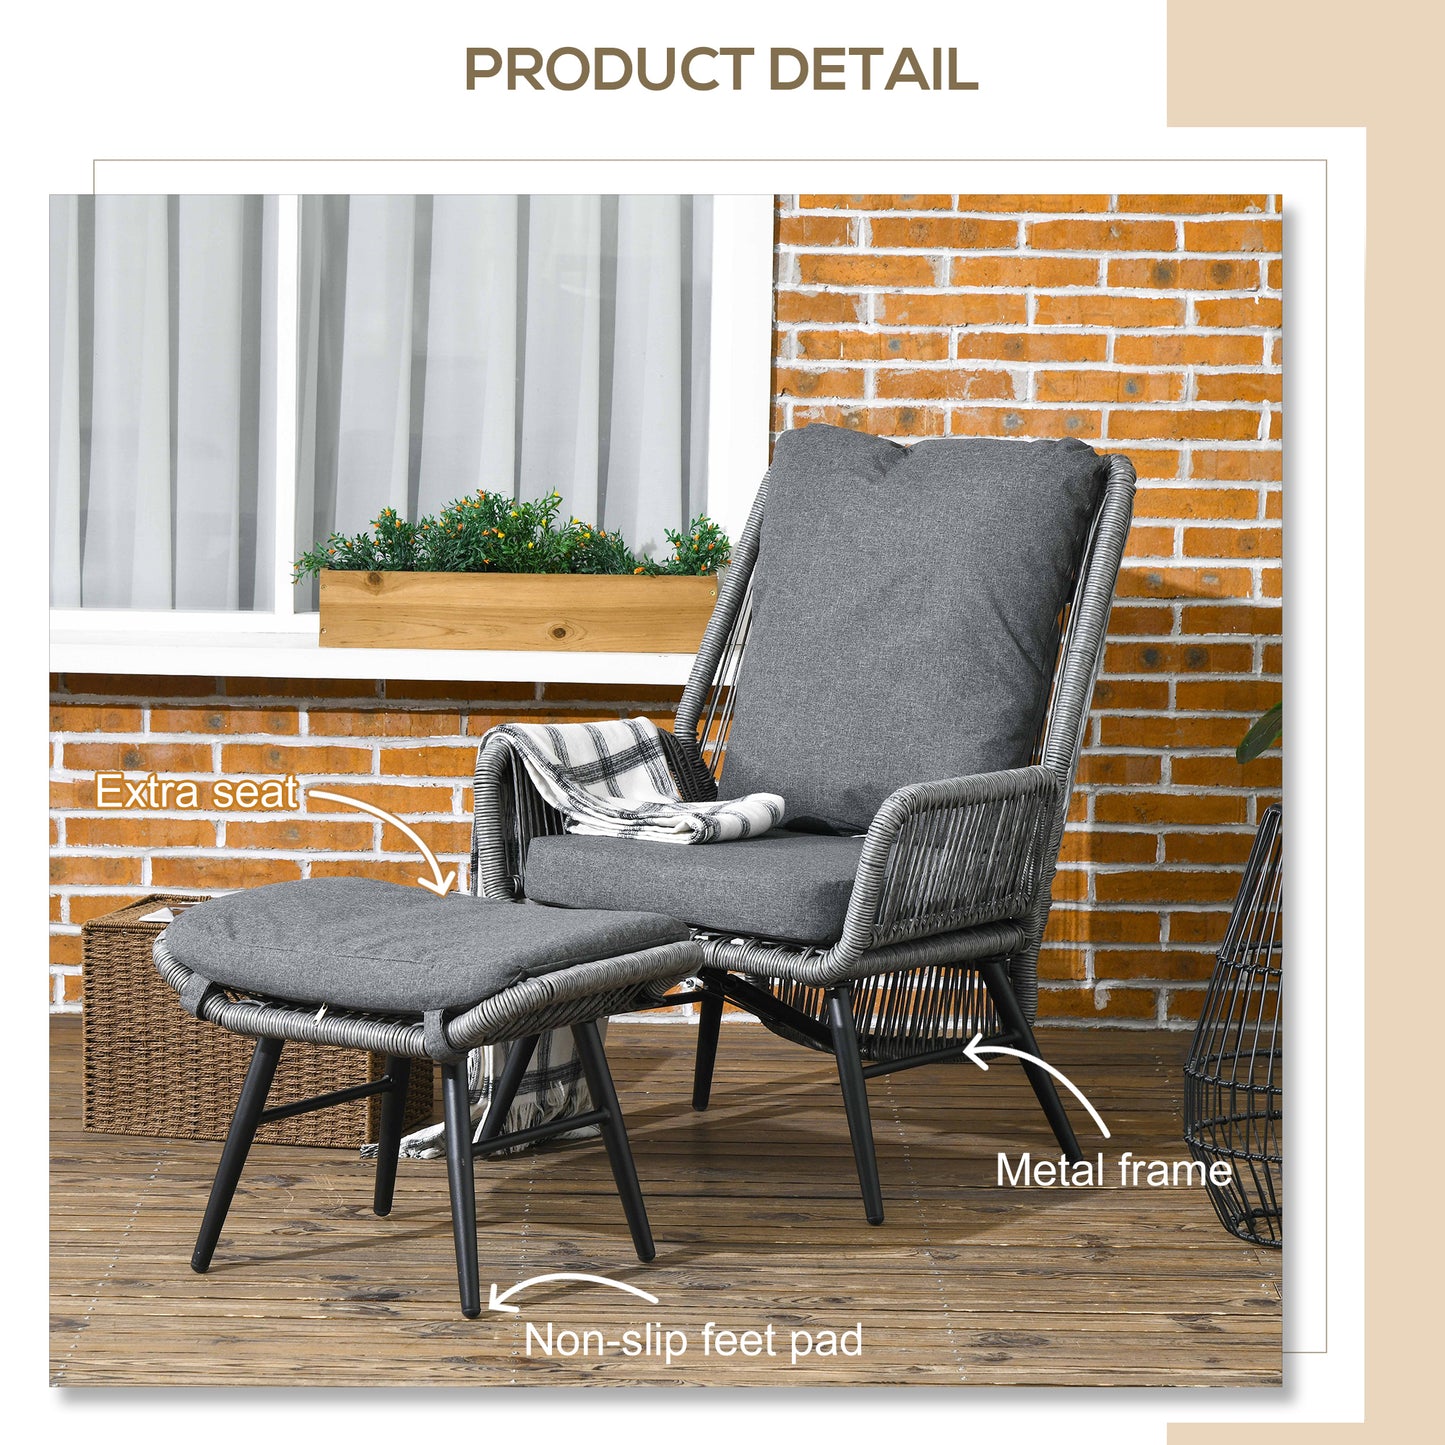 Outsunny 2 PCs PE Rattan Leisure Chair Set Outdoor Reclining Patio Chair and Footrest w/ Adjustable Backrest & Cushion Grey